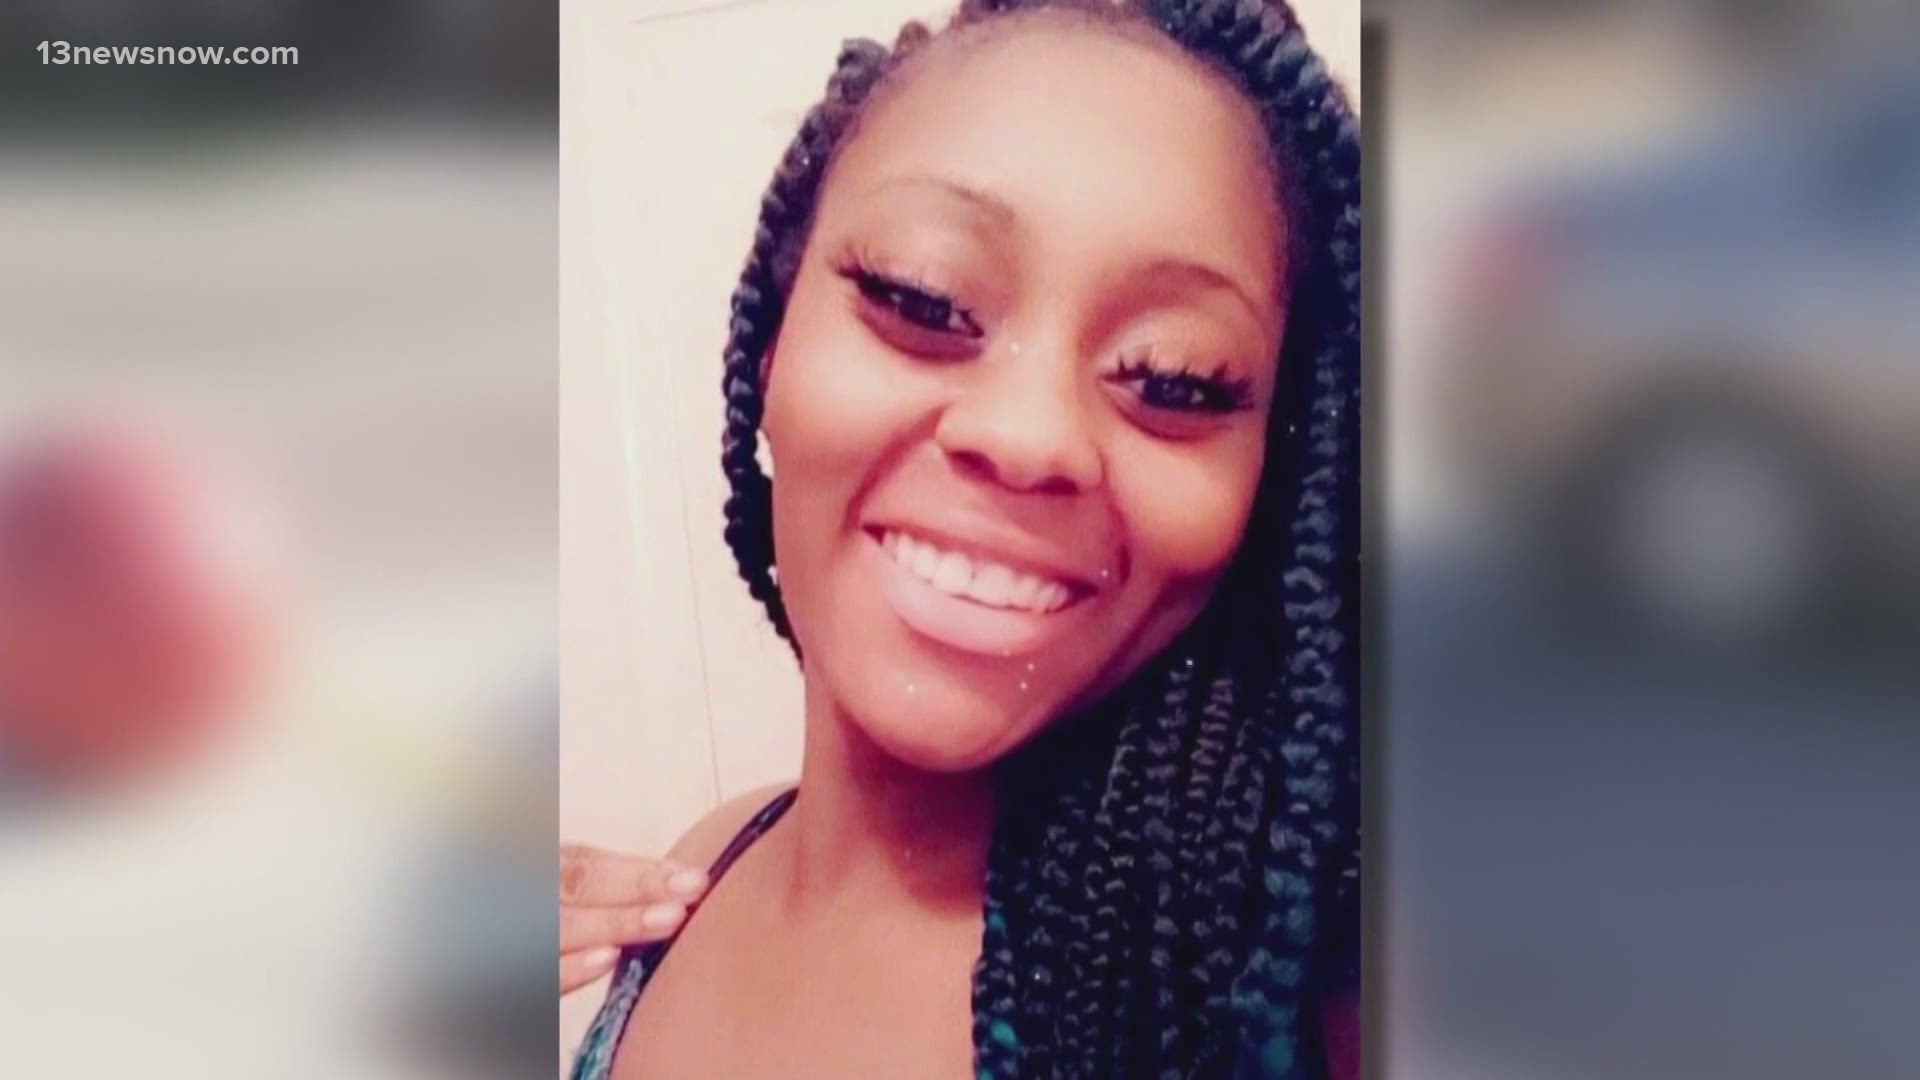 According to court documents, 17-year-old Asia Cowell was shot and killed to prevent her from testifying in a rape case. Three people are currently facing charges.